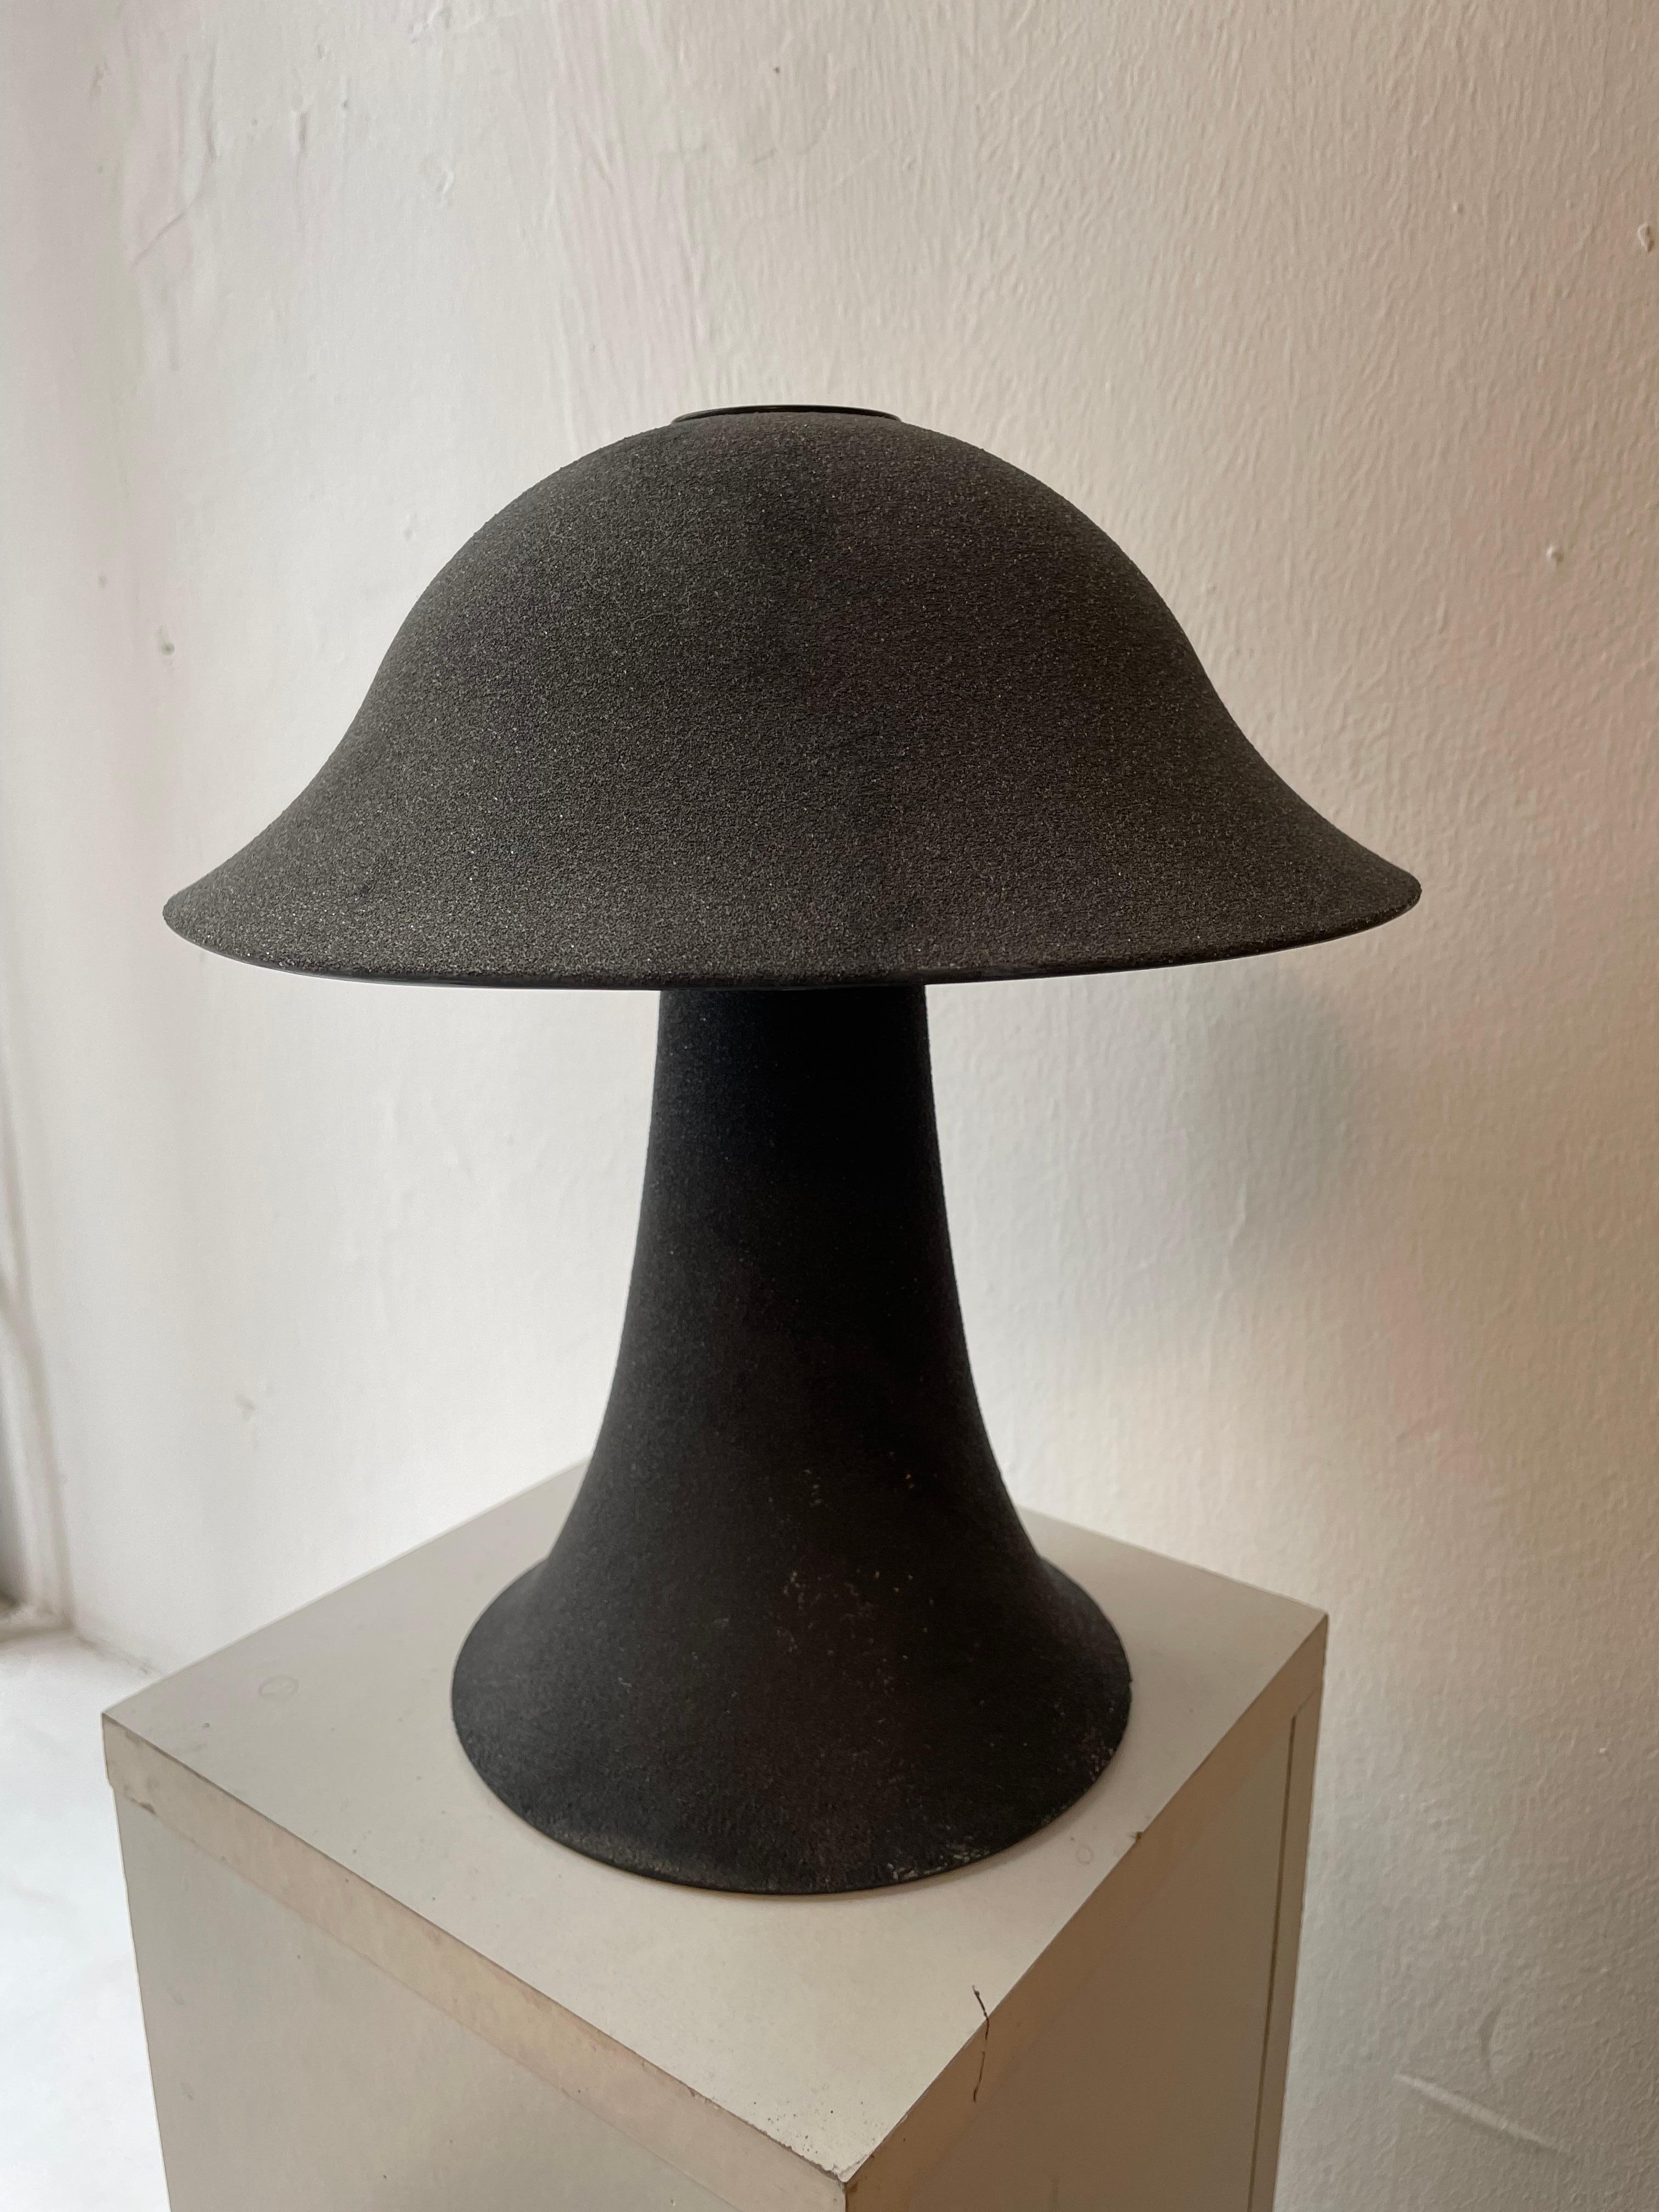 Peill & Putzler vintage ‘Mushroom’ table lamps made in Germany. Both lamps consist of a high-quality, hand-blown glass base and shade .The dark gray glass has an elegant textured satin finish.